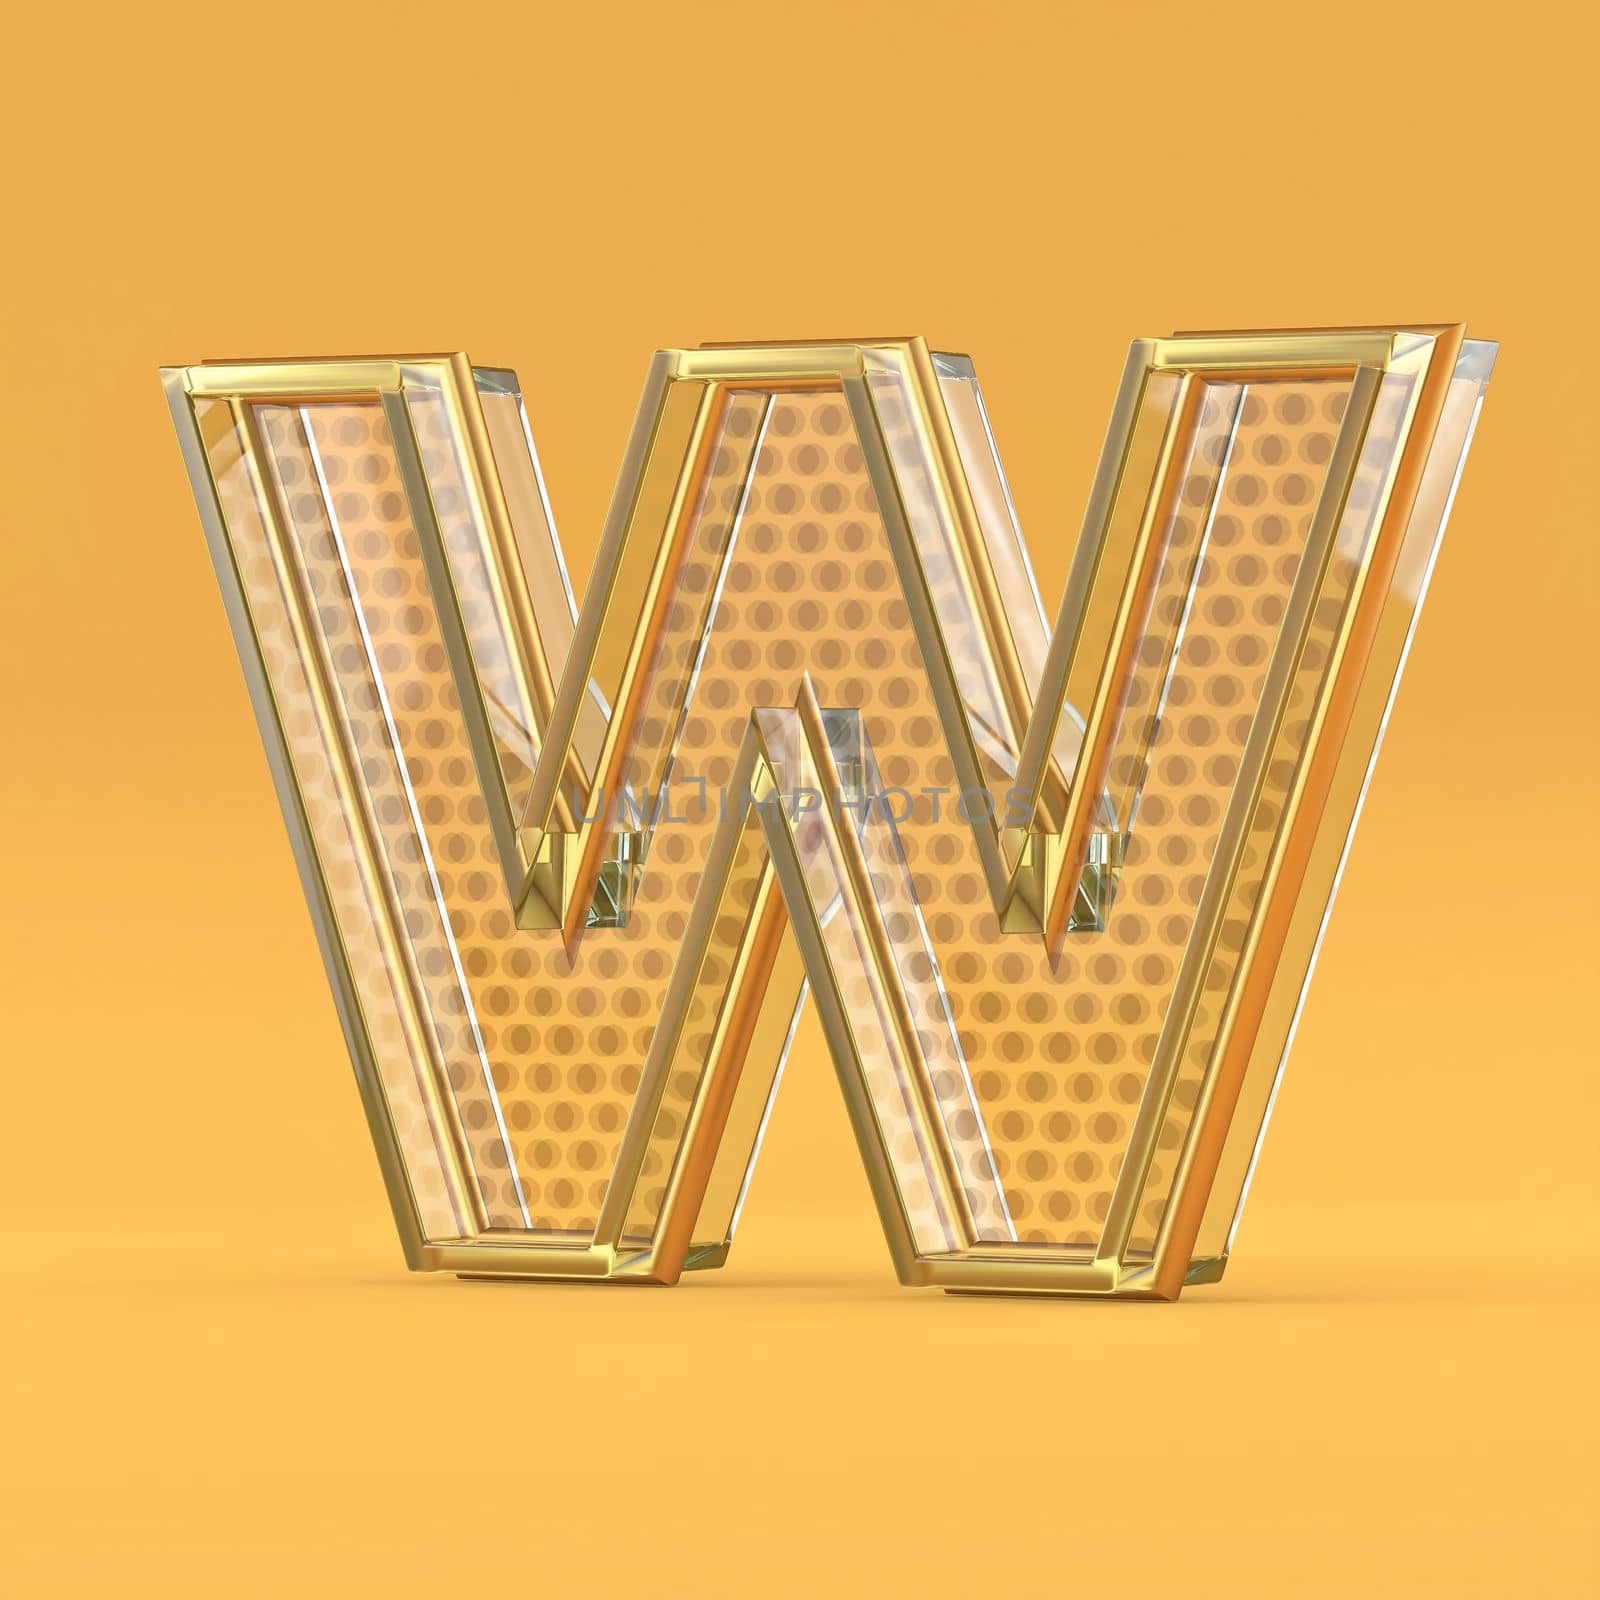 Gold wire and glass font letter W 3D rendering illustration isolated on orange background